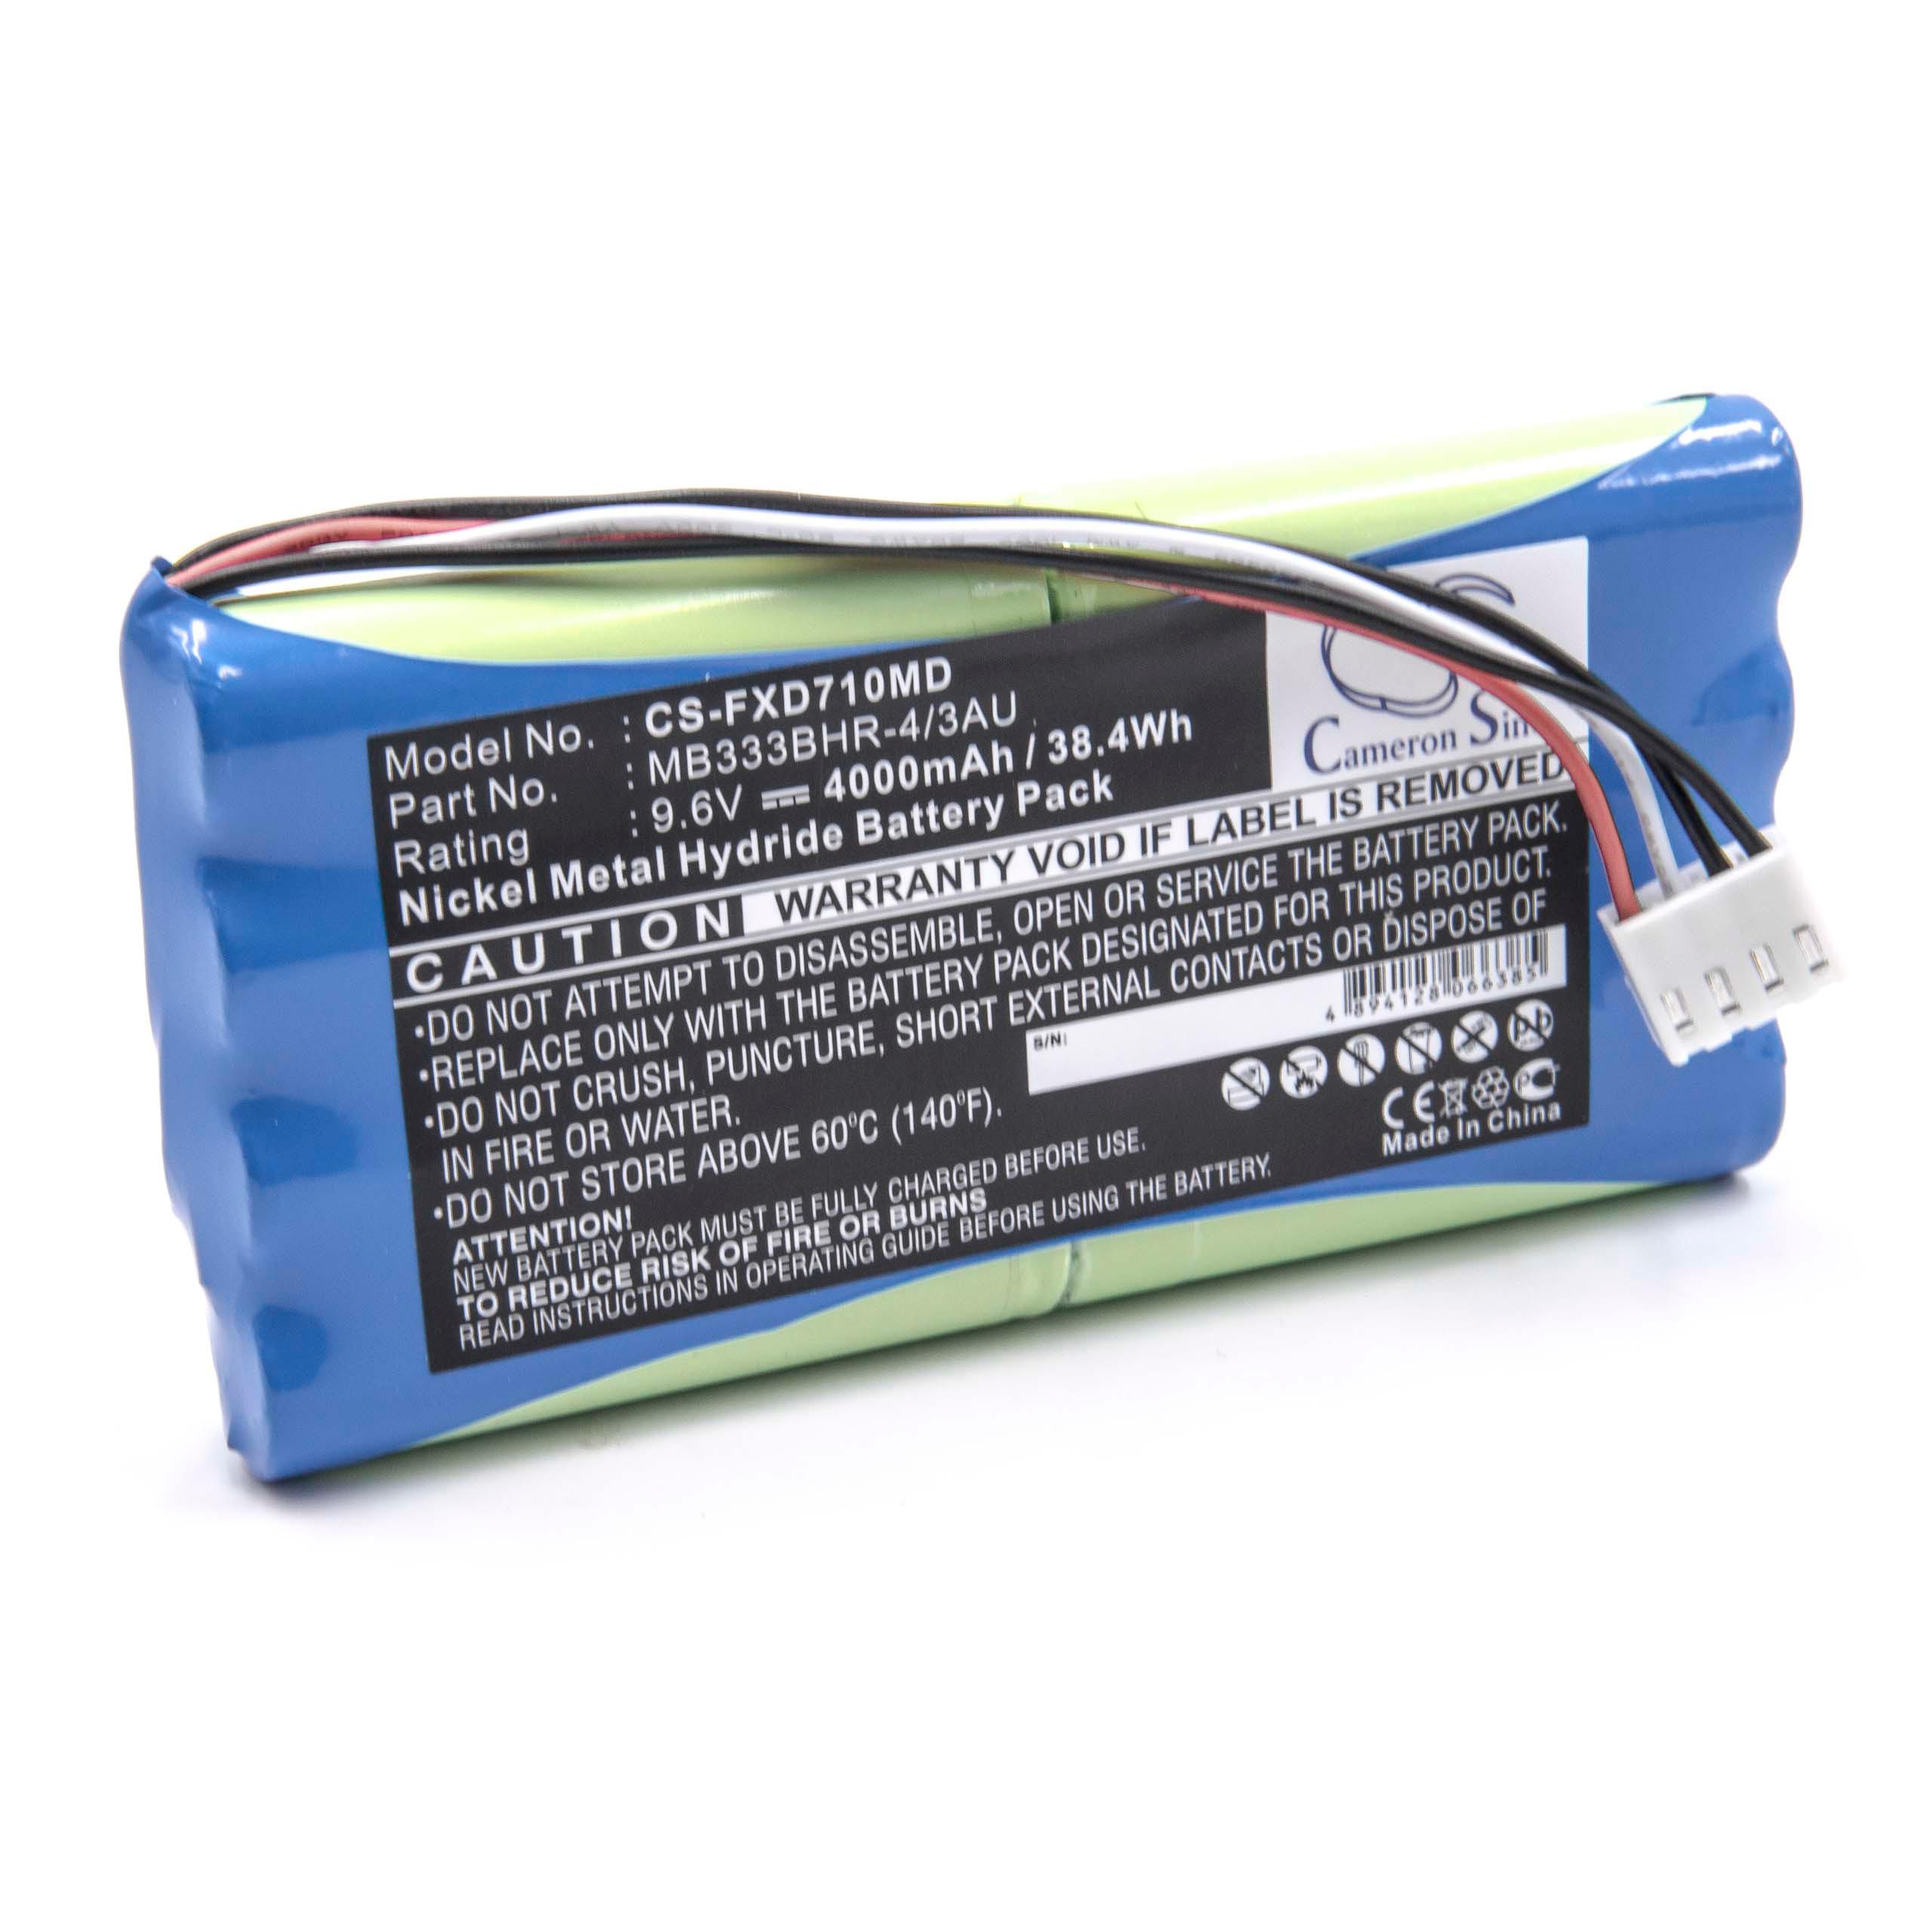 Medical Equipment Battery Replacement for Fukuda MB333BHR-4/3AU, 8PH-4/3A 3700-H-J18 - 4000mAh 9.6V NiMH